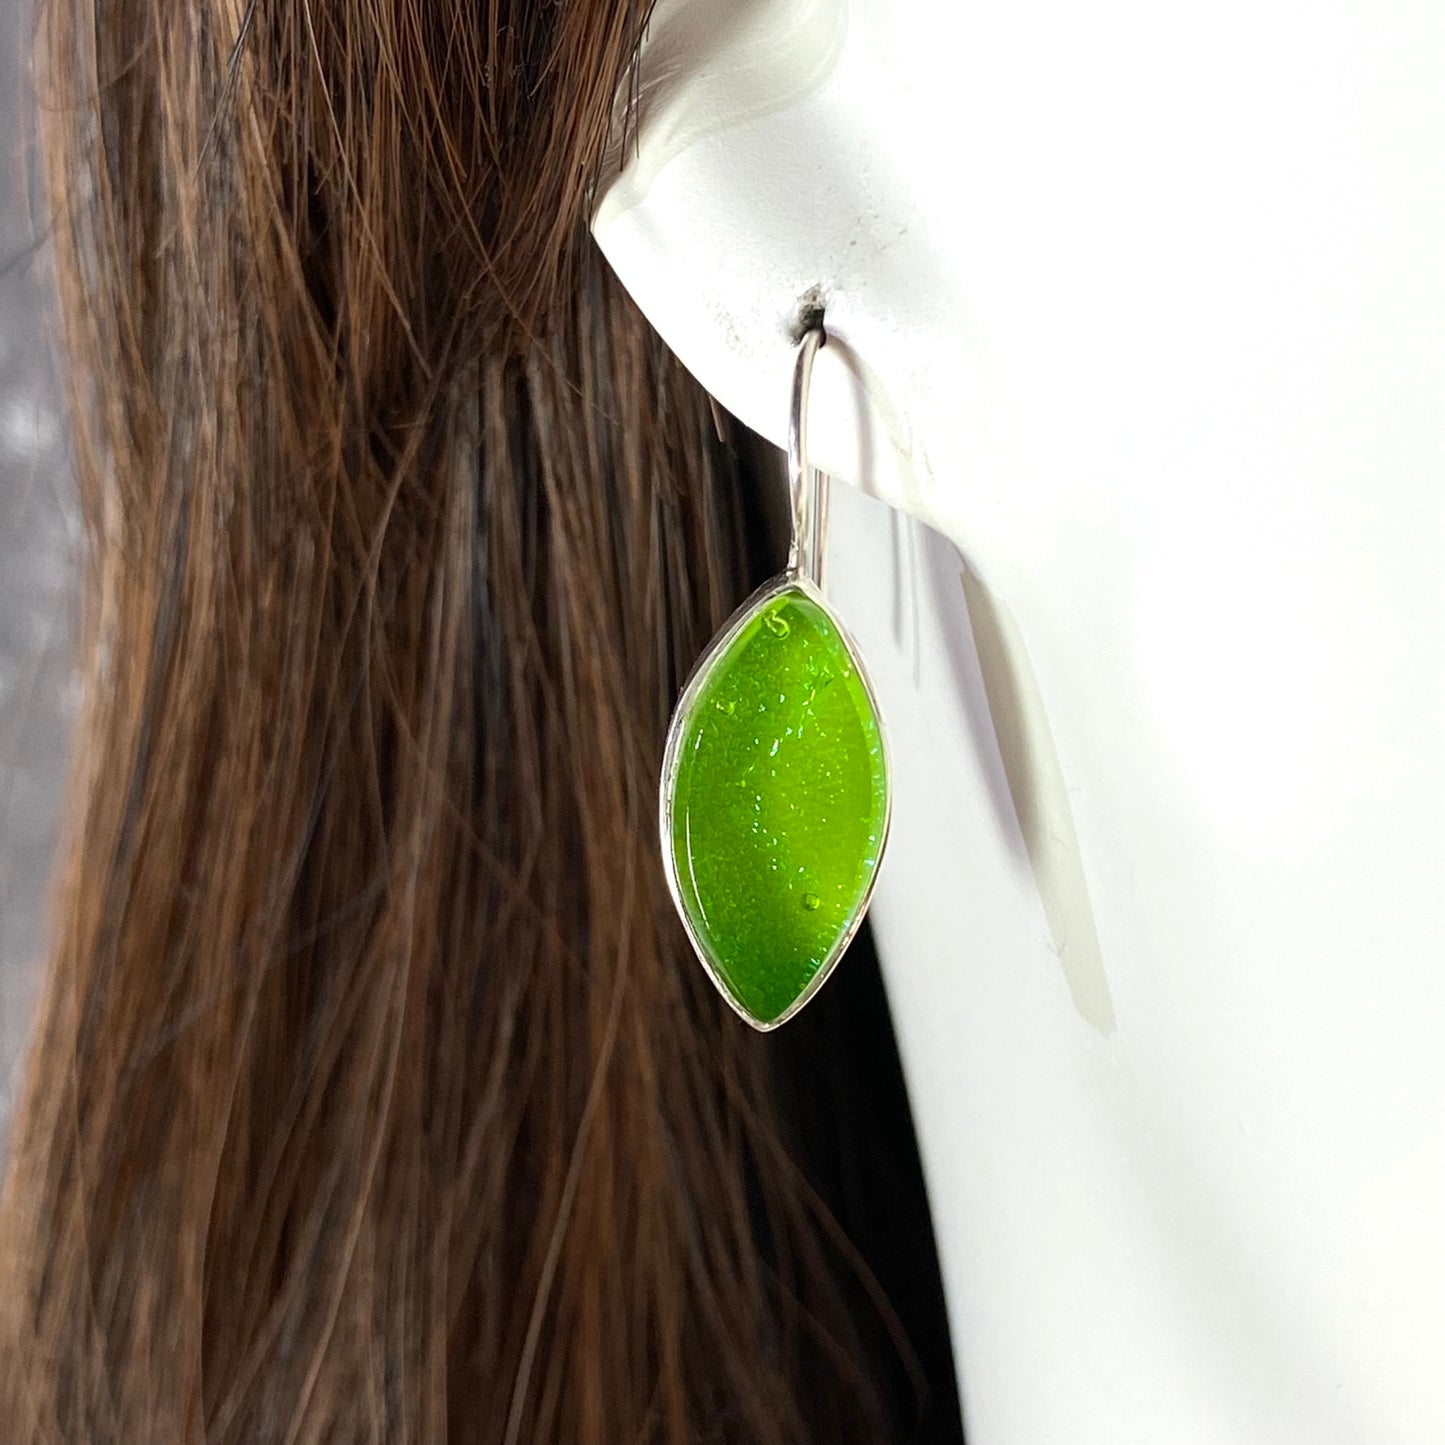 Marquise Earrings in Citron